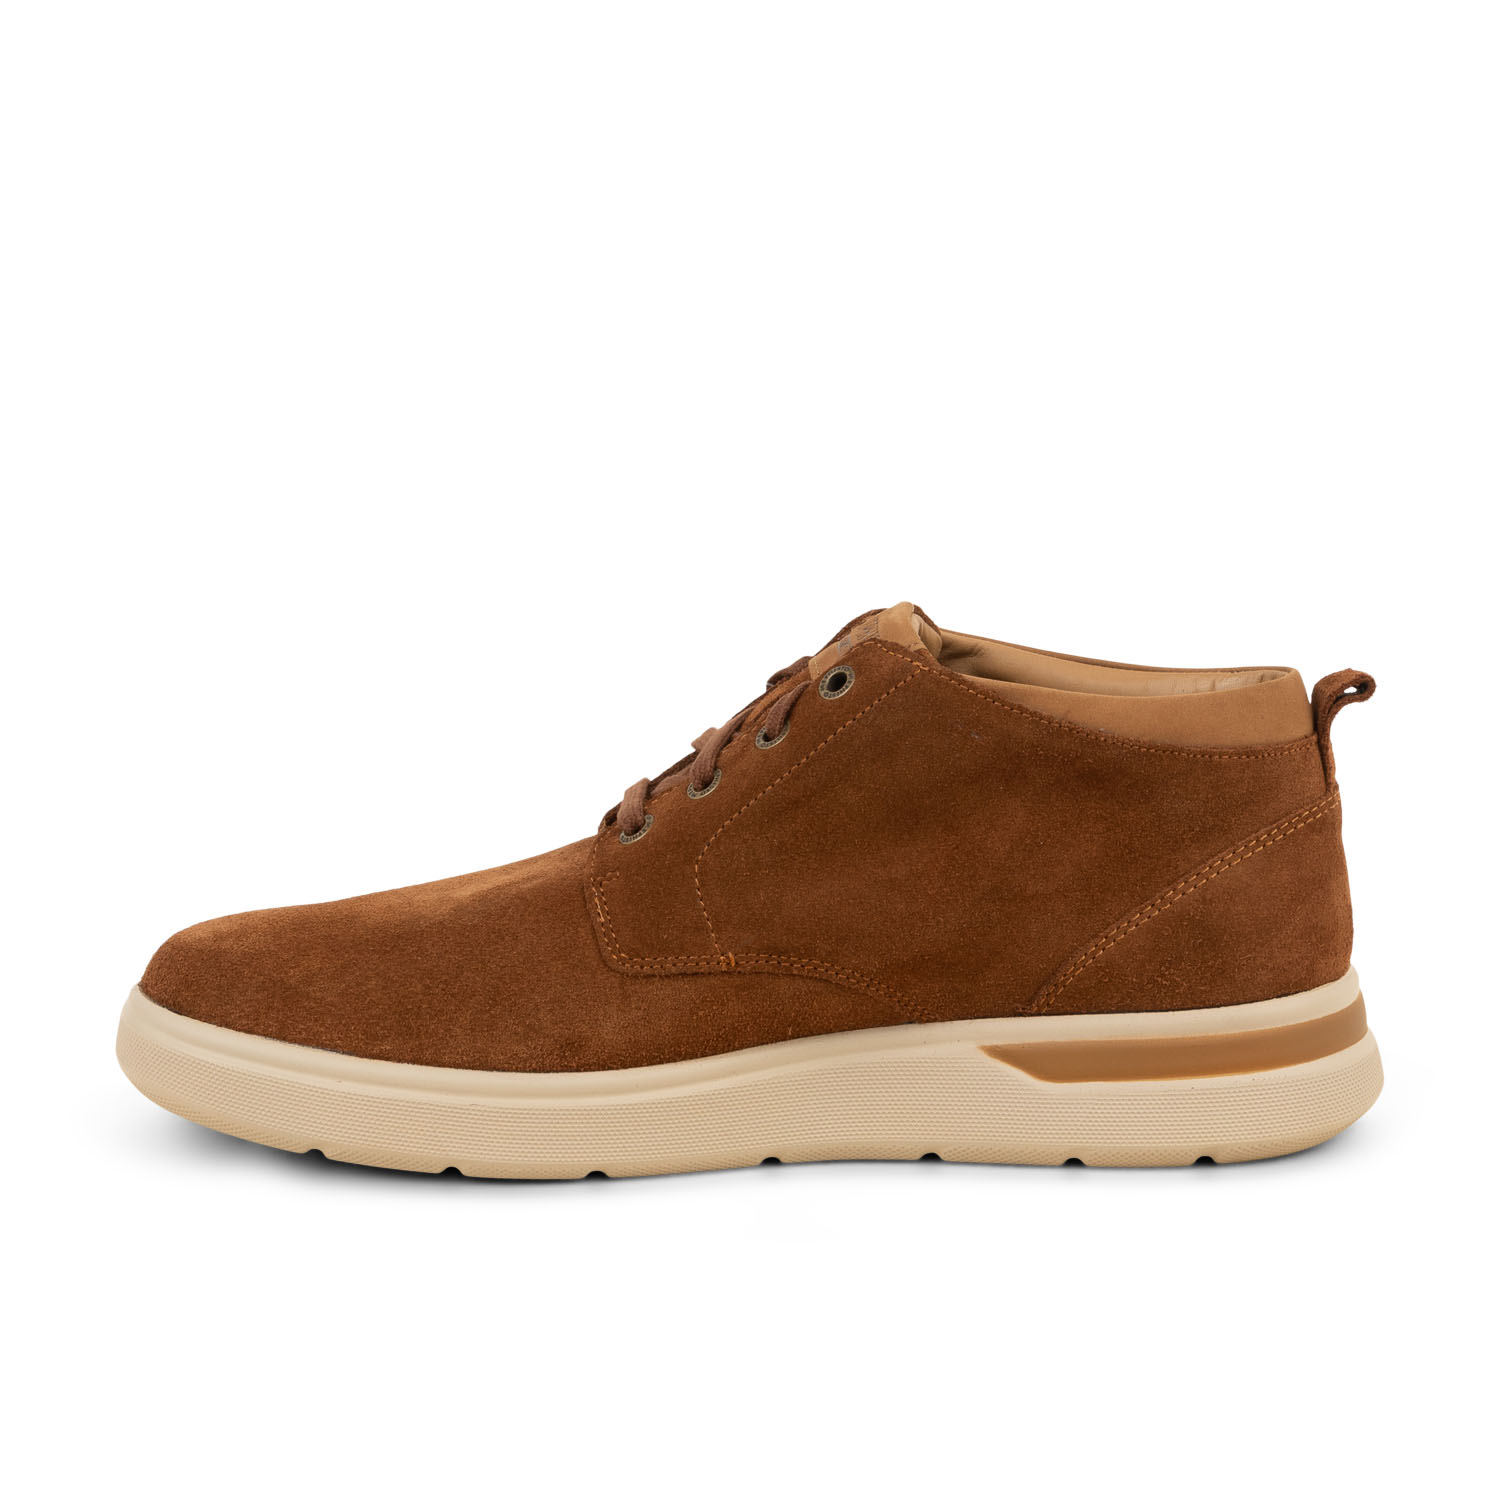 04 - OLMER - MEPHISTO - Chaussures à lacets - Nubuck